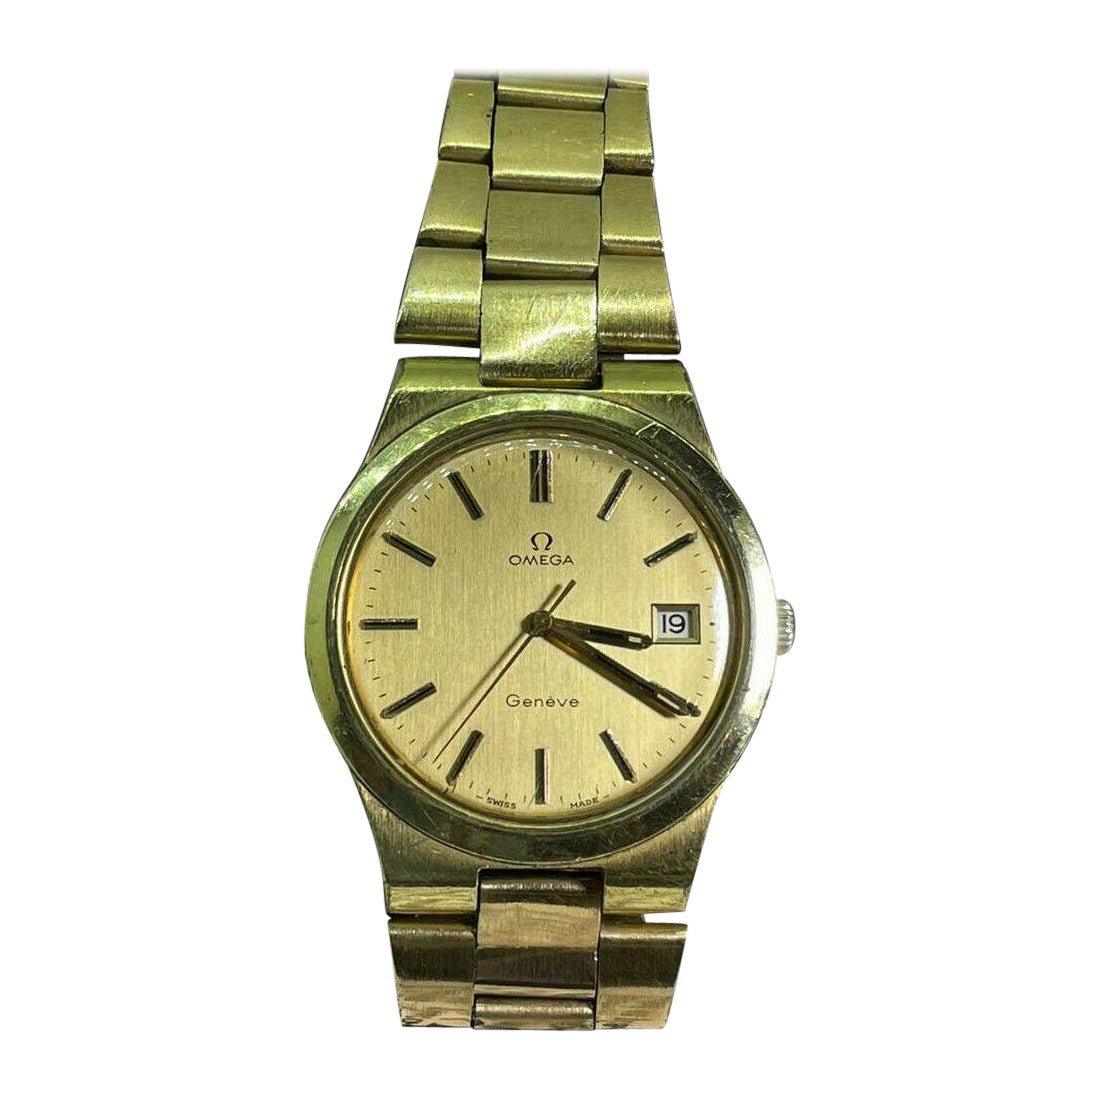 Montre Vintage Omega Geneve Manual, cal 1030 Gold-Plated Gents' Watch, c1974.